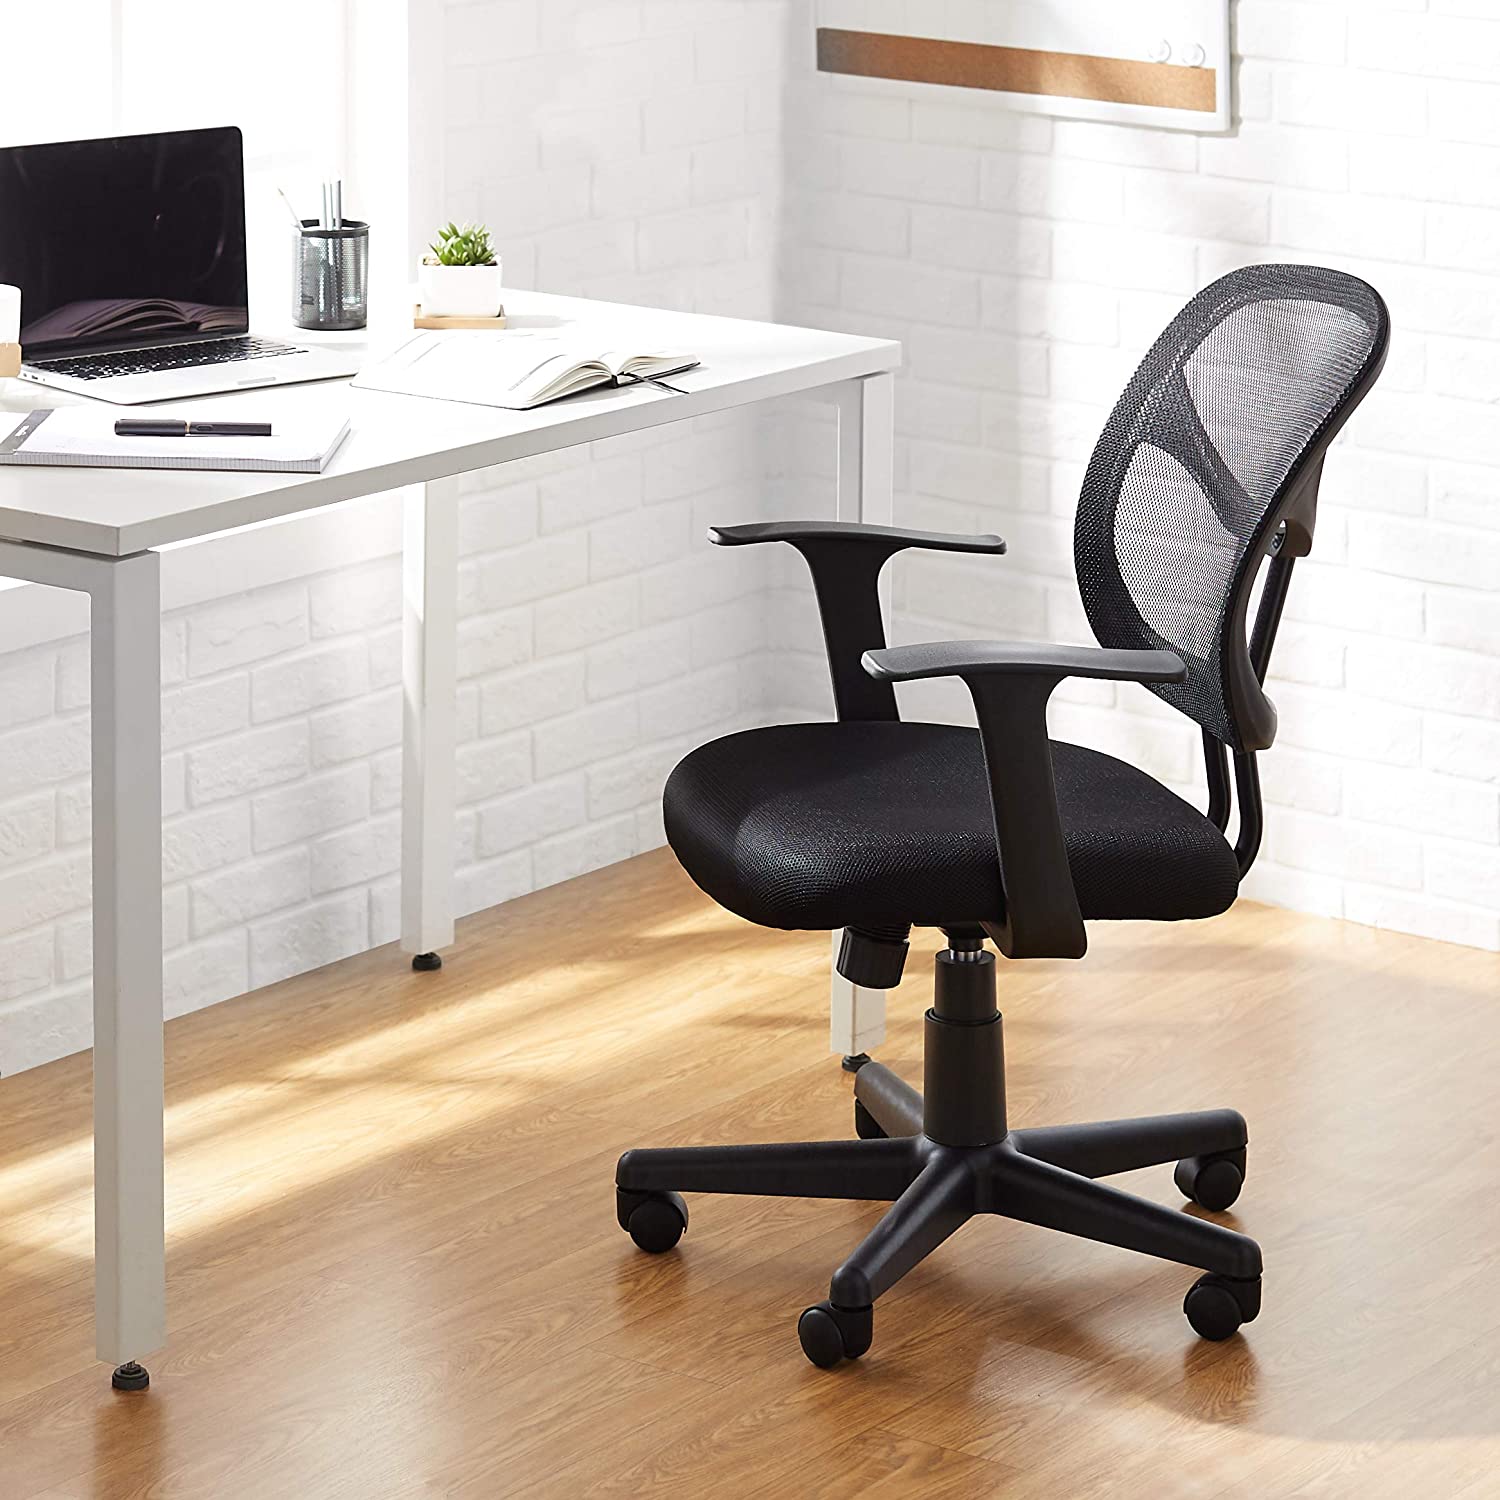 8 Best Home Office Chairs to Work From Home in 2022